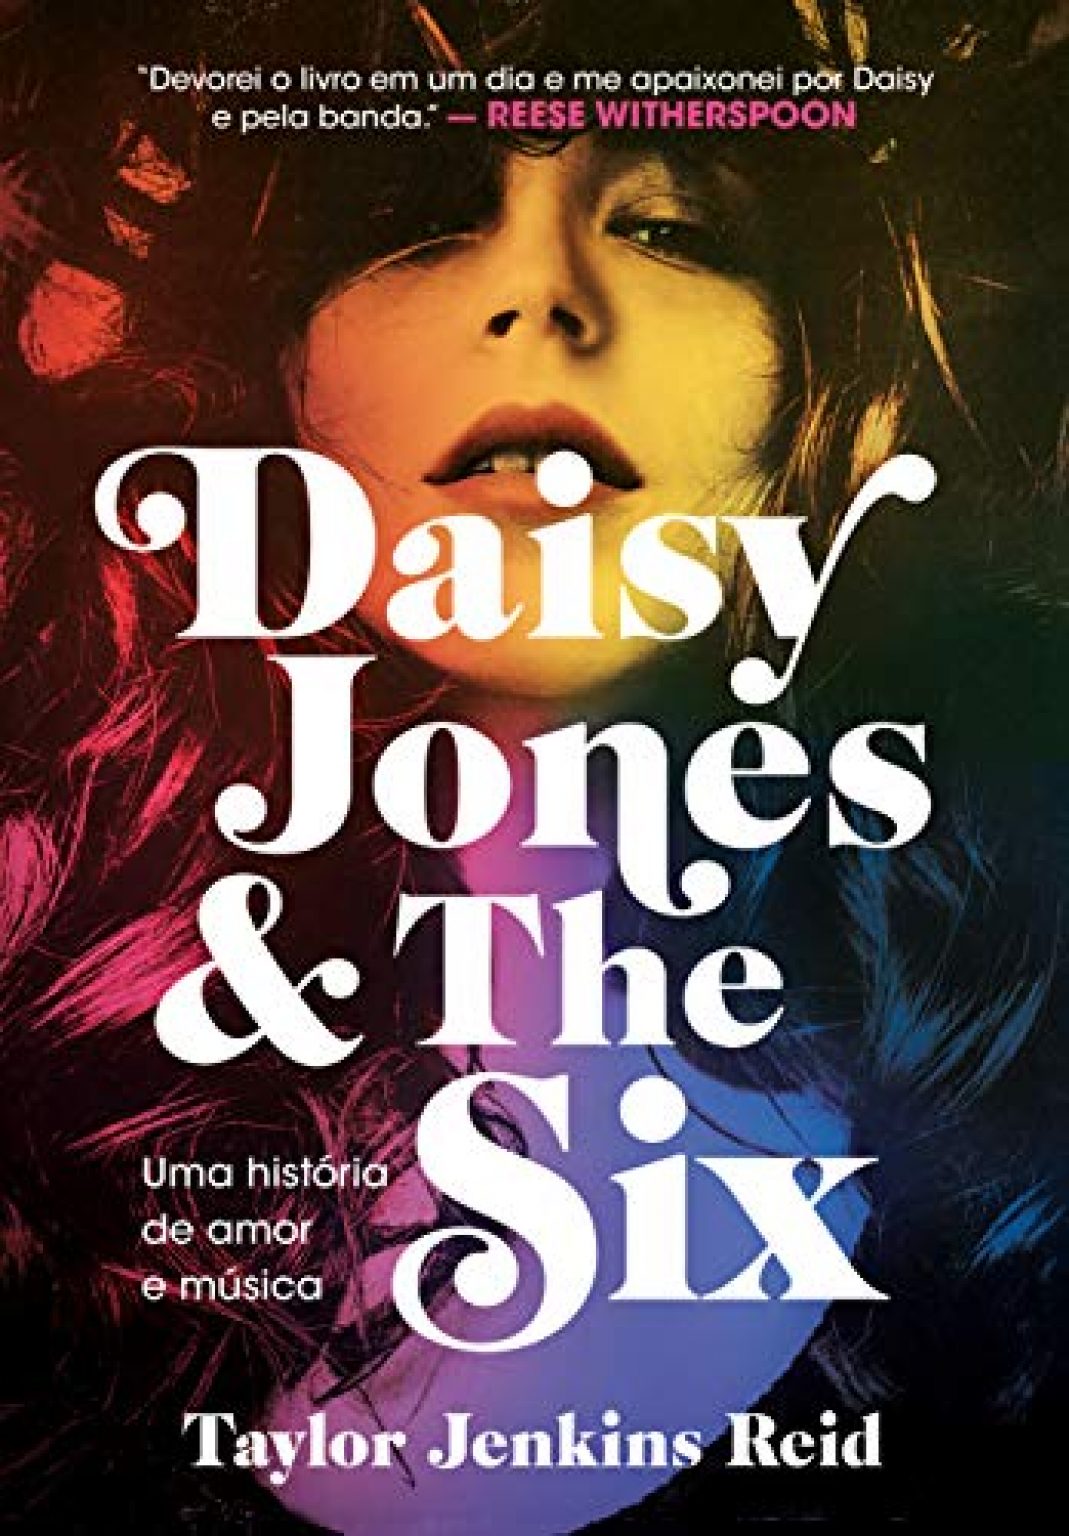 Daisy Jones & The Six - A Music Love Story Worth Experiencing in 2022